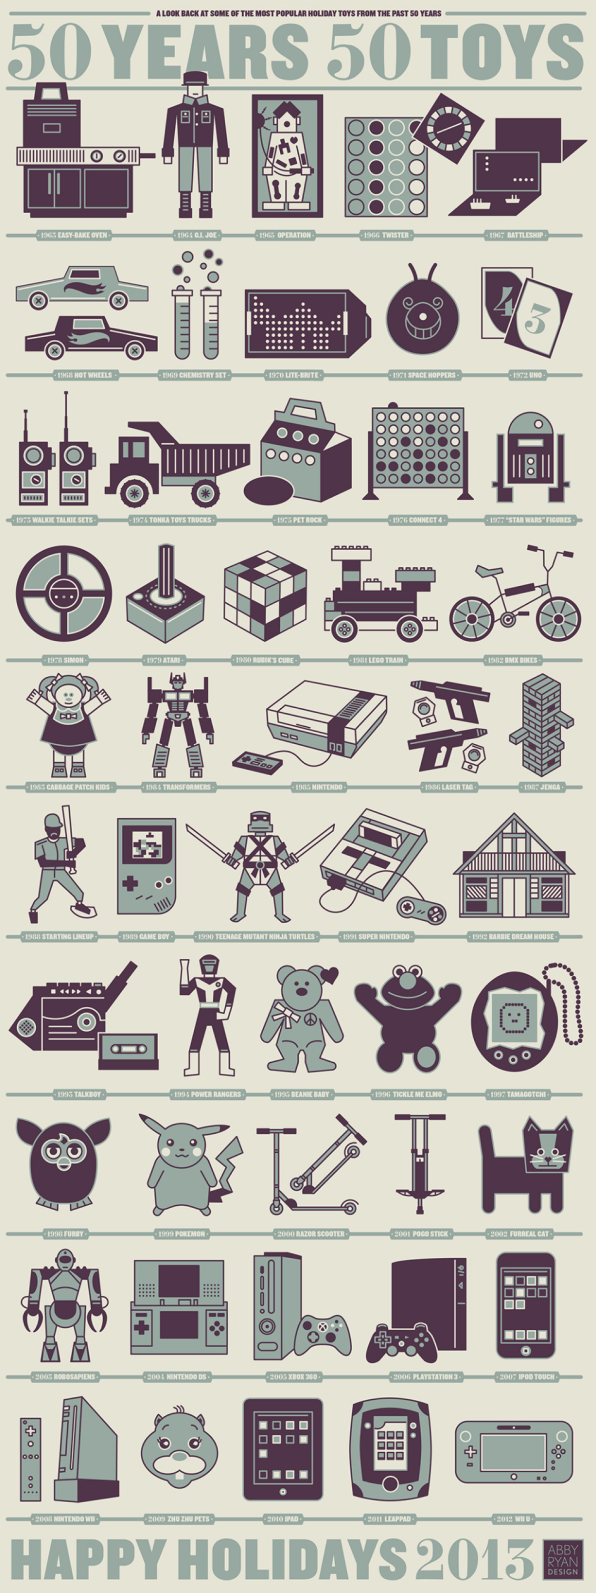 Infographic: The Most Popular Toys Of The Past 50 Years